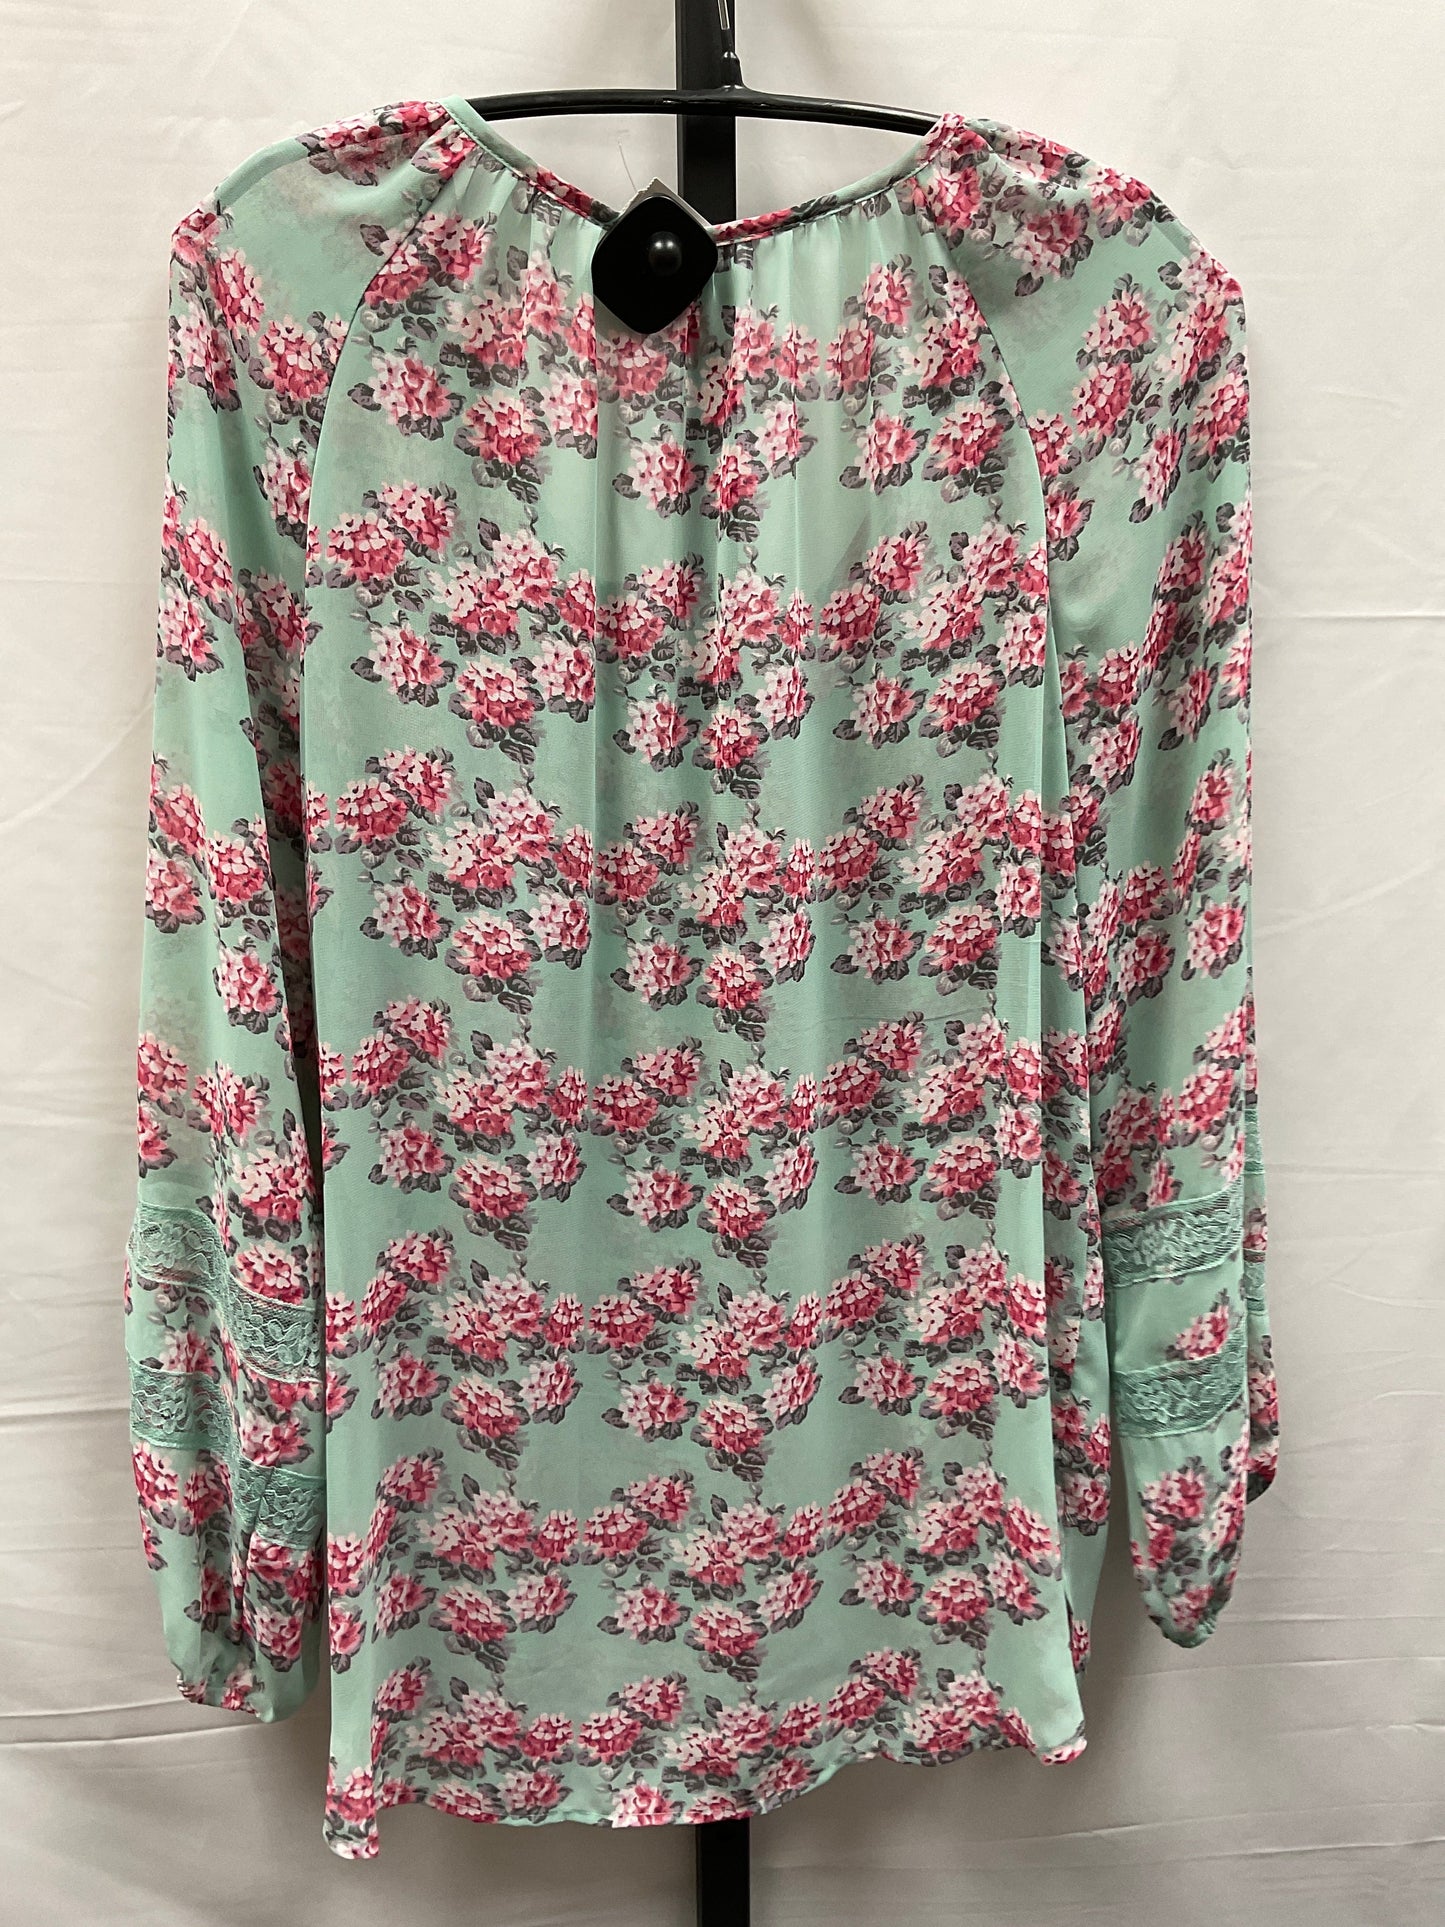 Floral Print Top Long Sleeve Clothes Mentor, Size S